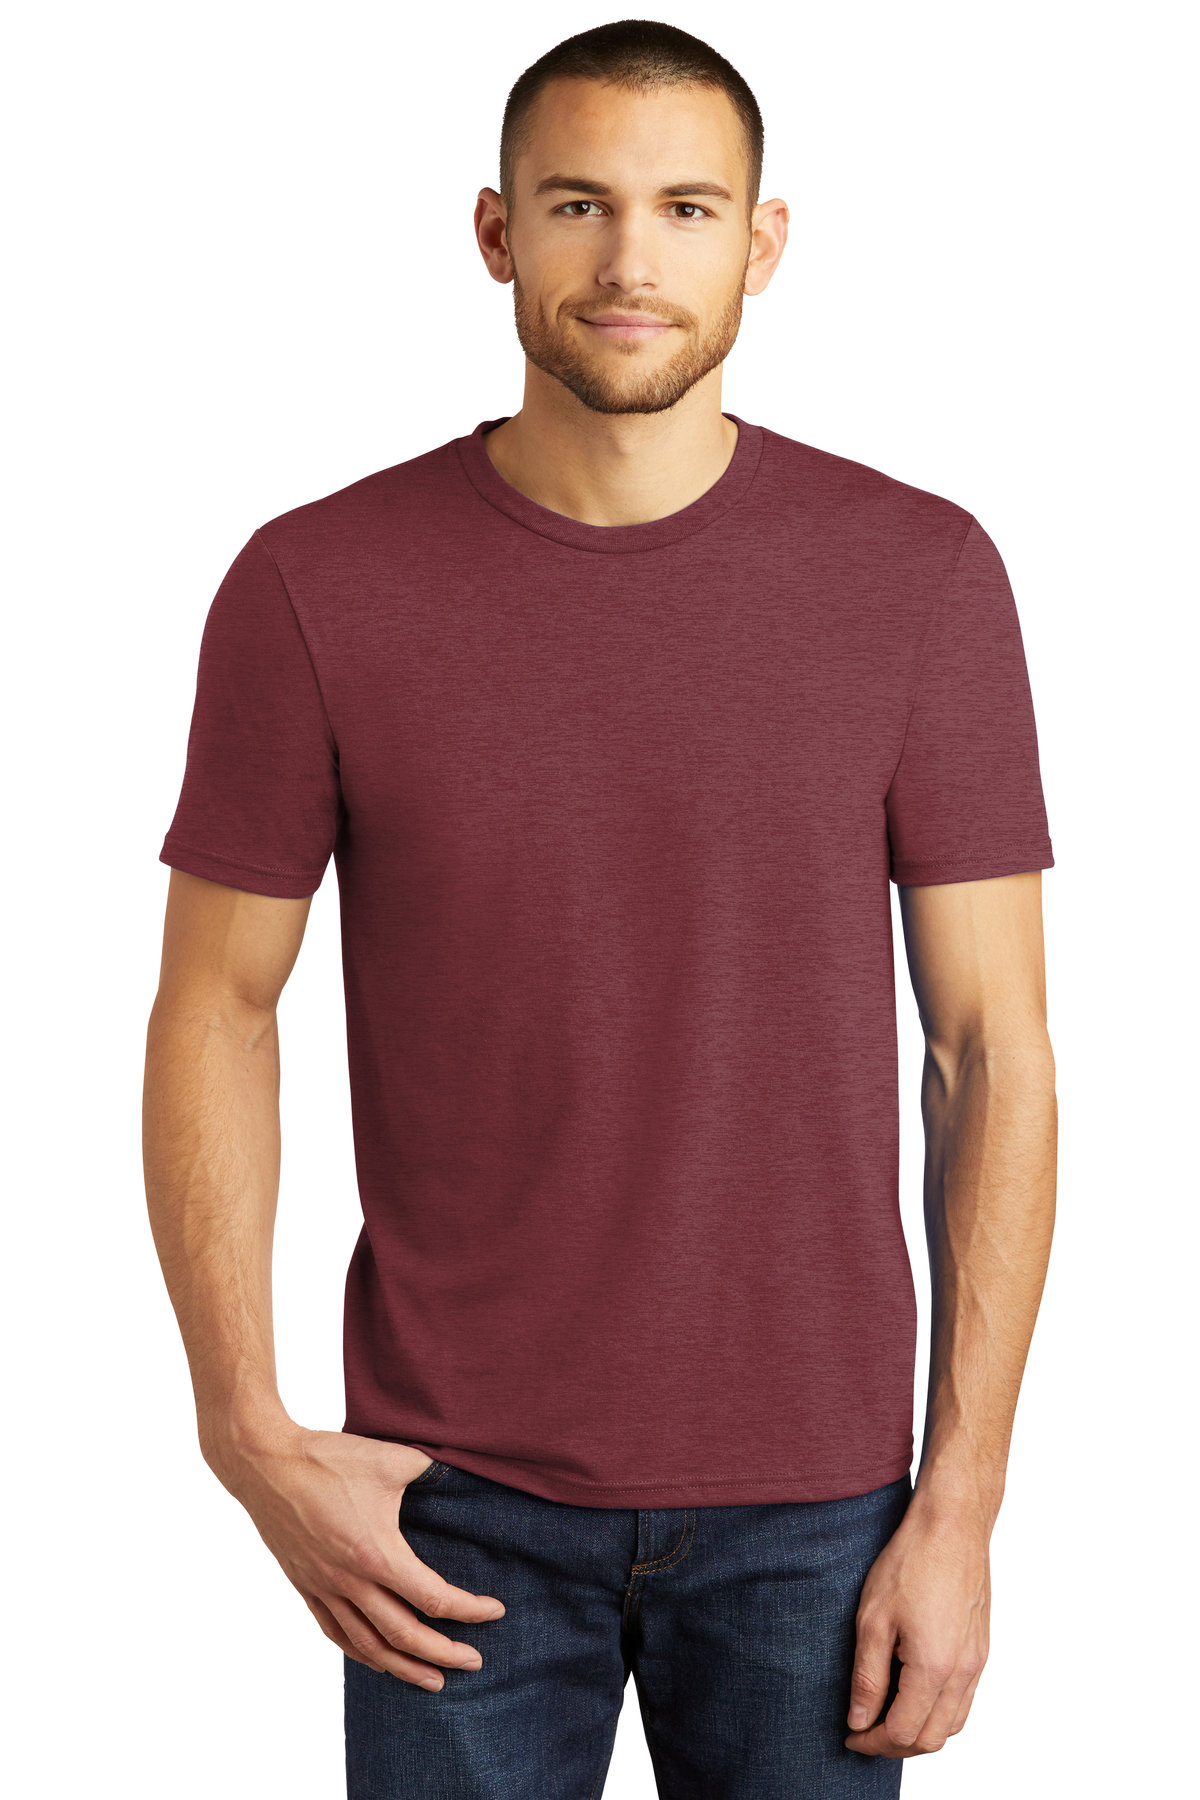 District Printed Men's Perfect TriBlend Tee - Queensboro